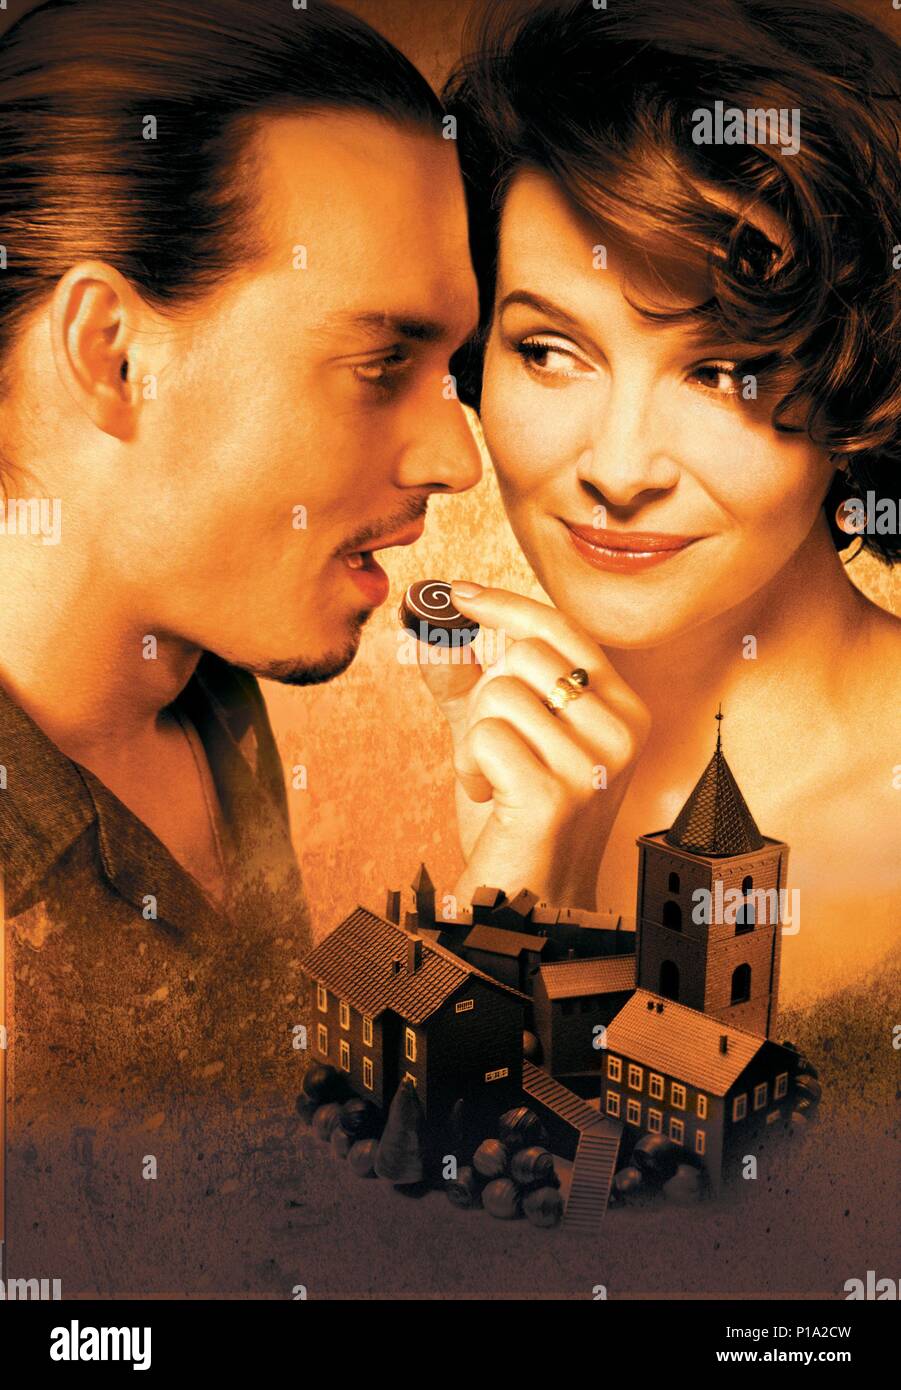 Original Film Title: CHOCOLAT.  English Title: CHOCOLAT.  Film Director: LASSE HALLSTROM.  Year: 2000.  Stars: JOHNNY DEPP; JULIETTE BINOCHE. Copyright: Editorial inside use only. This is a publicly distributed handout. Access rights only, no license of copyright provided. Mandatory authorization to Visual Icon (www.visual-icon.com) is required for the reproduction of this image. Credit: MIRAMAX FILMS / Album Stock Photo